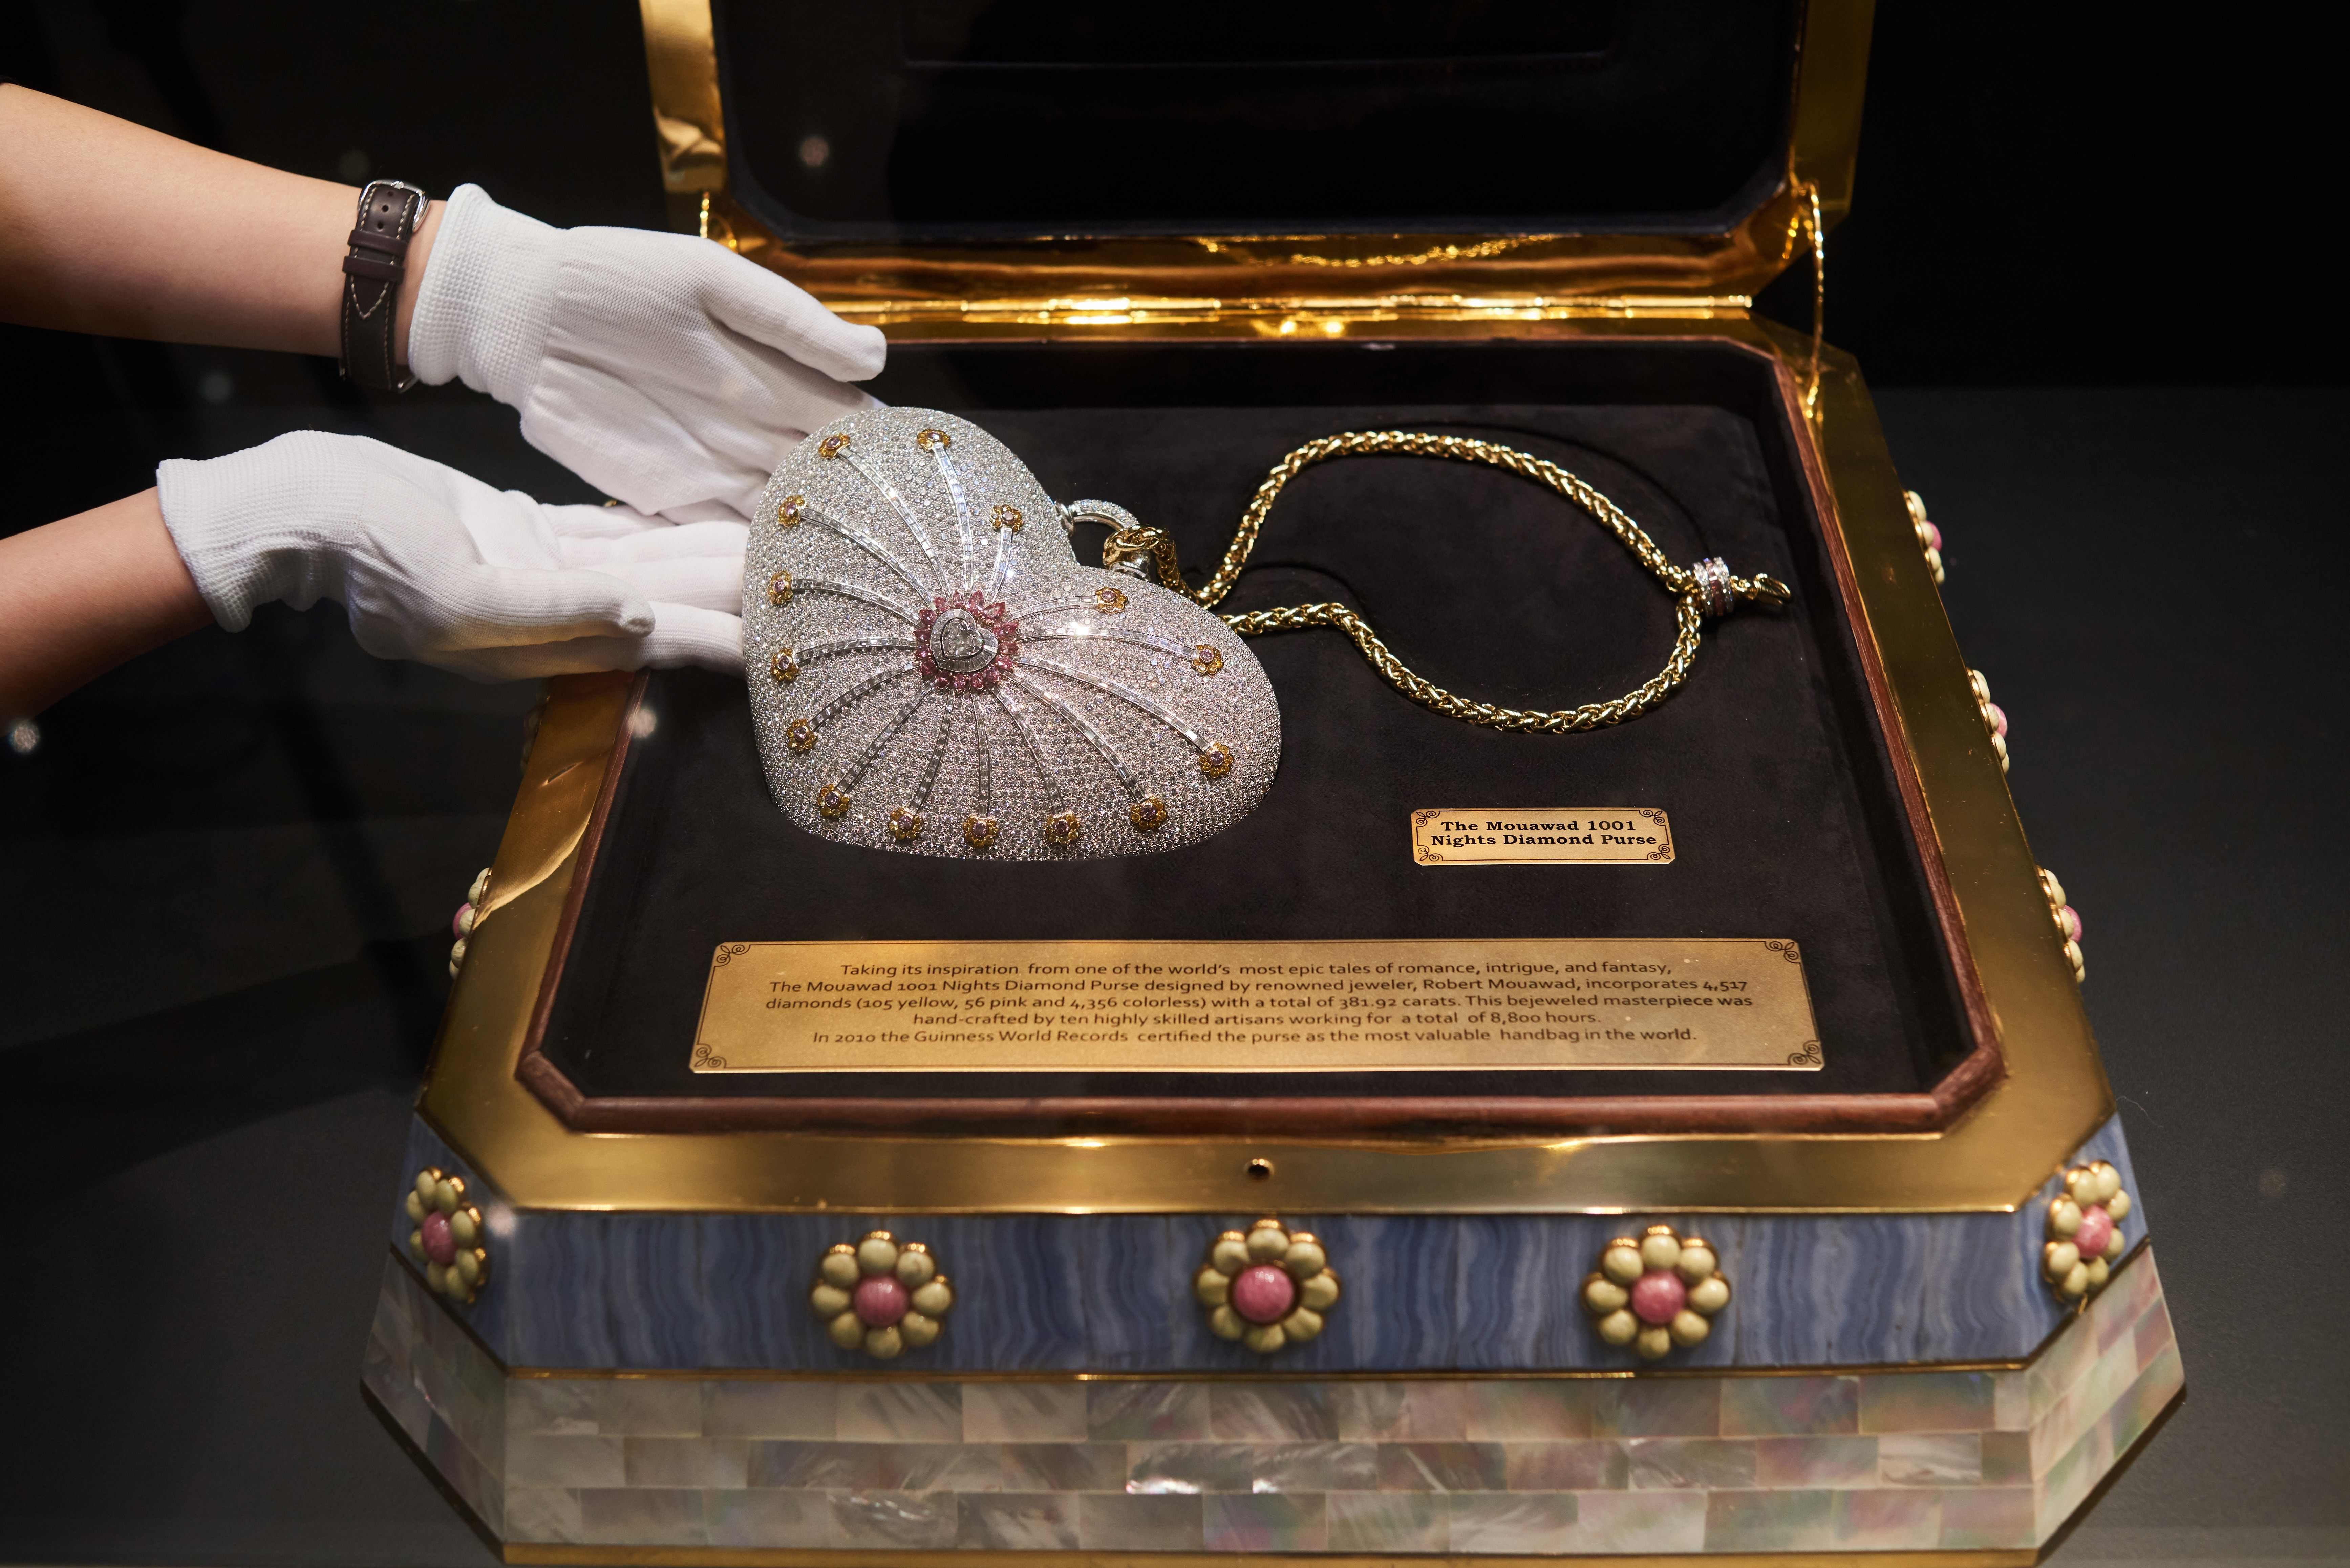 World's most expensive handbag sells for jaw-dropping price at auction